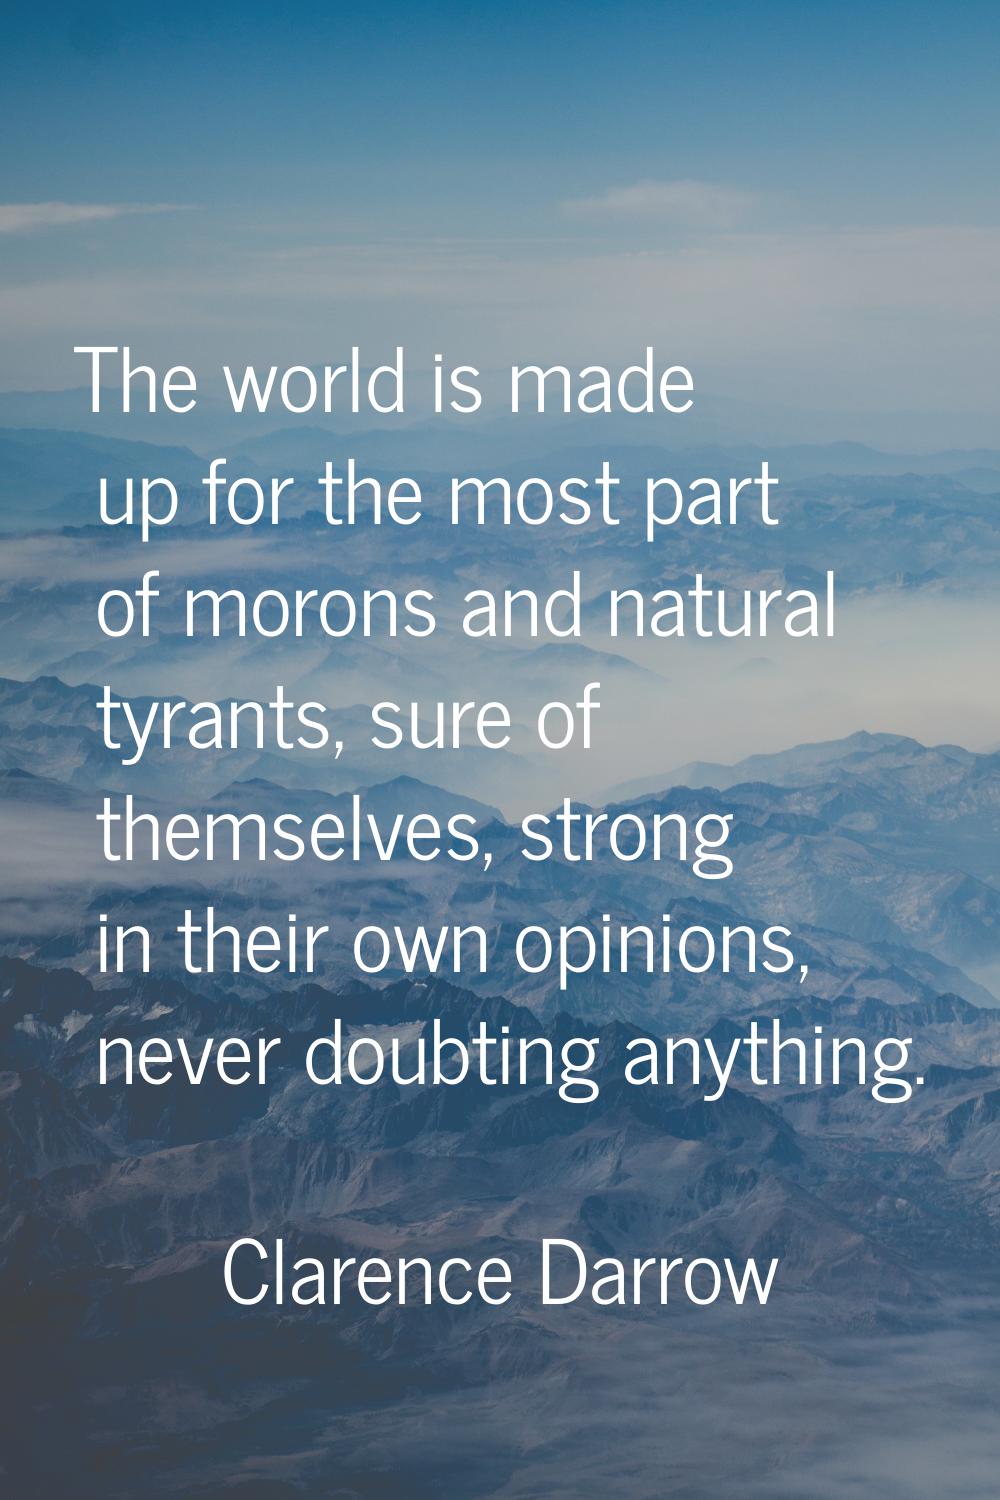 The world is made up for the most part of morons and natural tyrants, sure of themselves, strong in